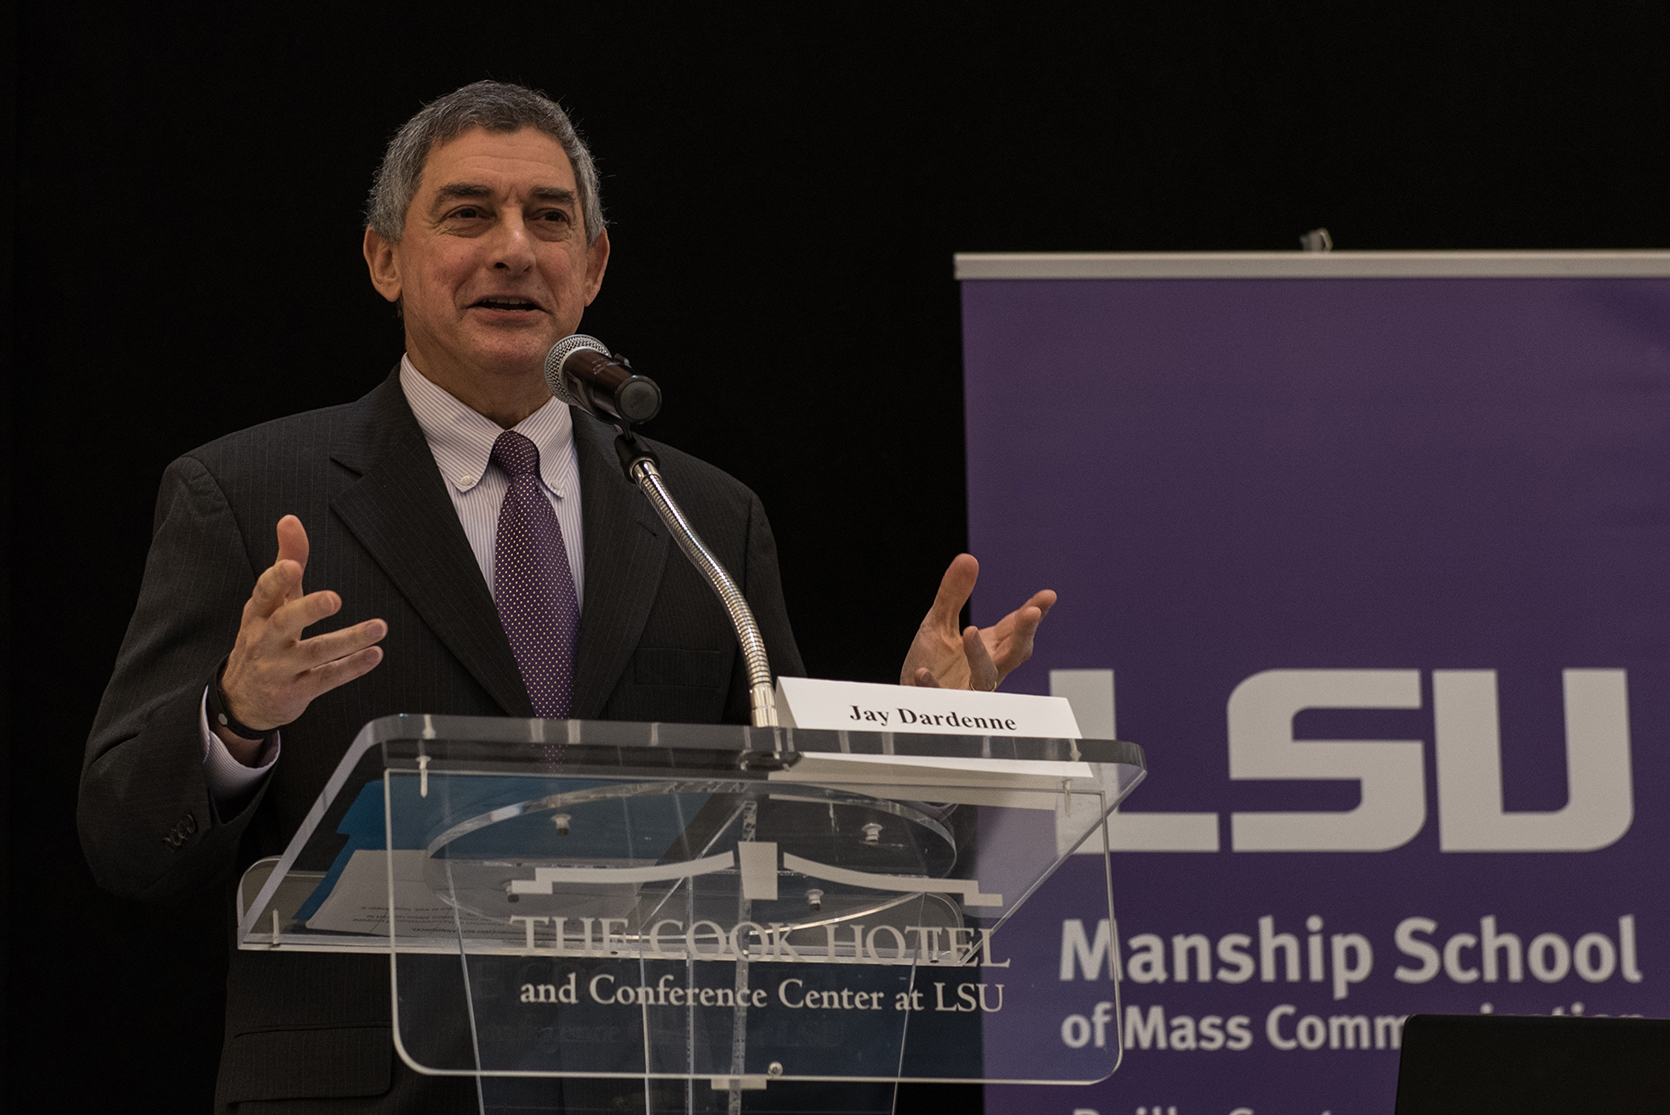 LA Commissioner of Administration Jay Dardenne gives the Summit's keynote address